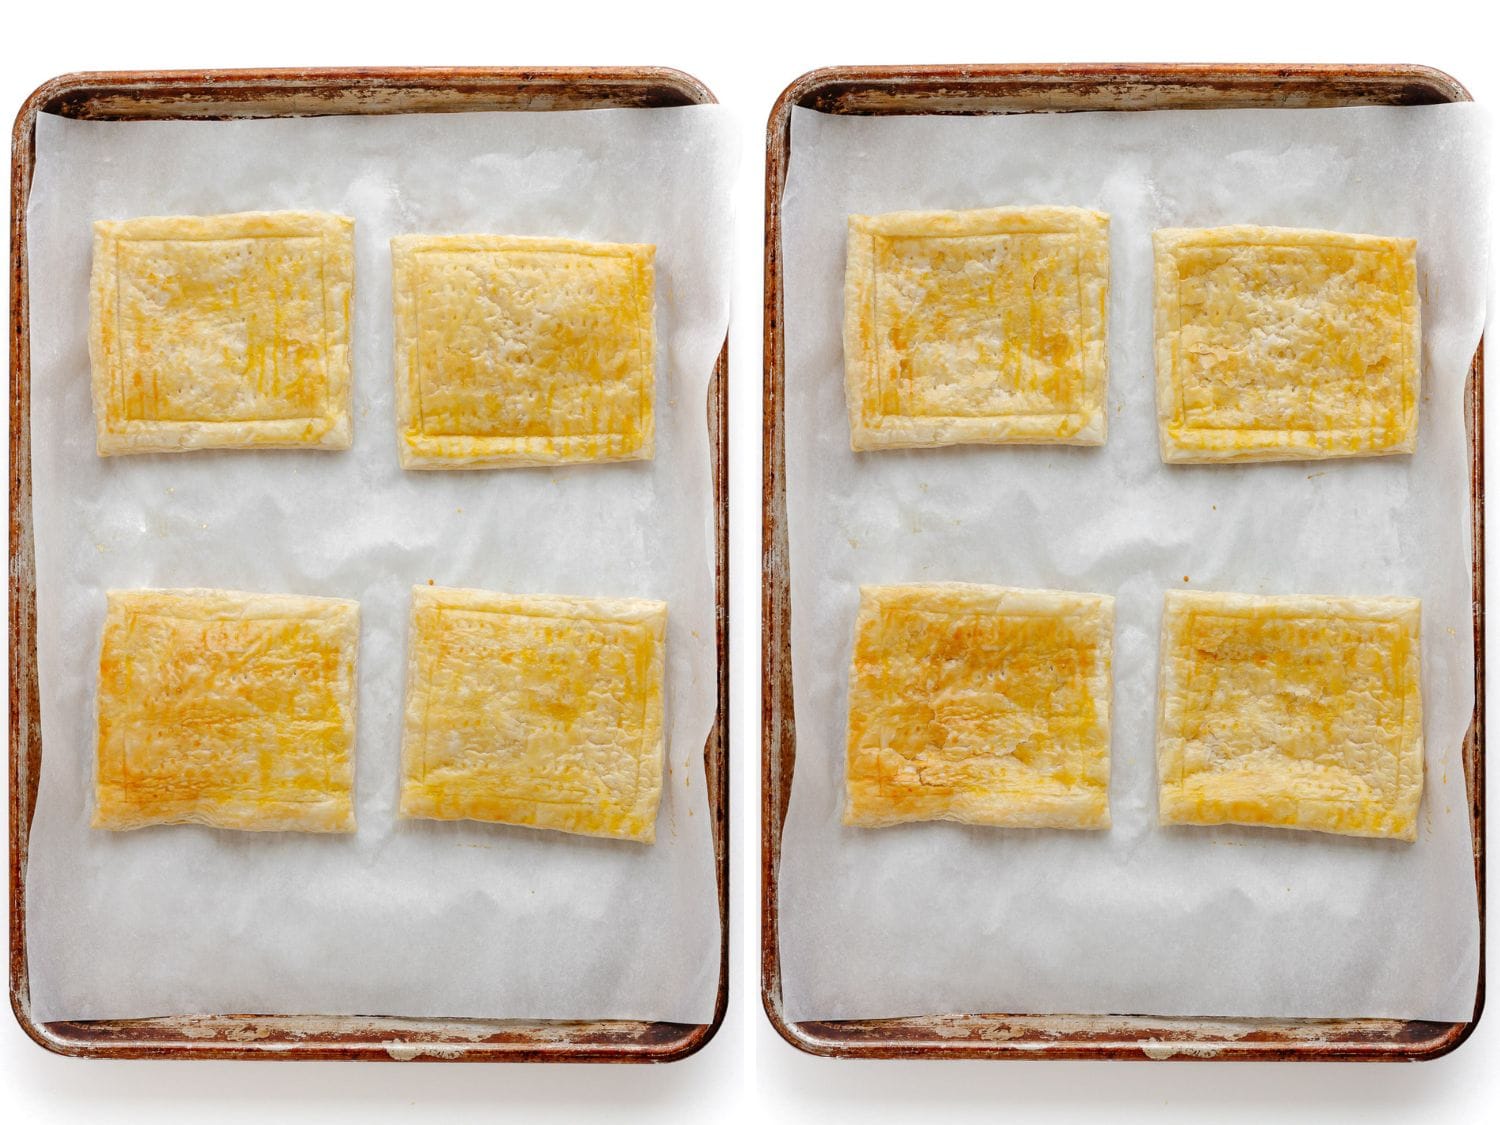 Pre-baked puff pastry squares on a lined baking sheet ready to make pizza with.